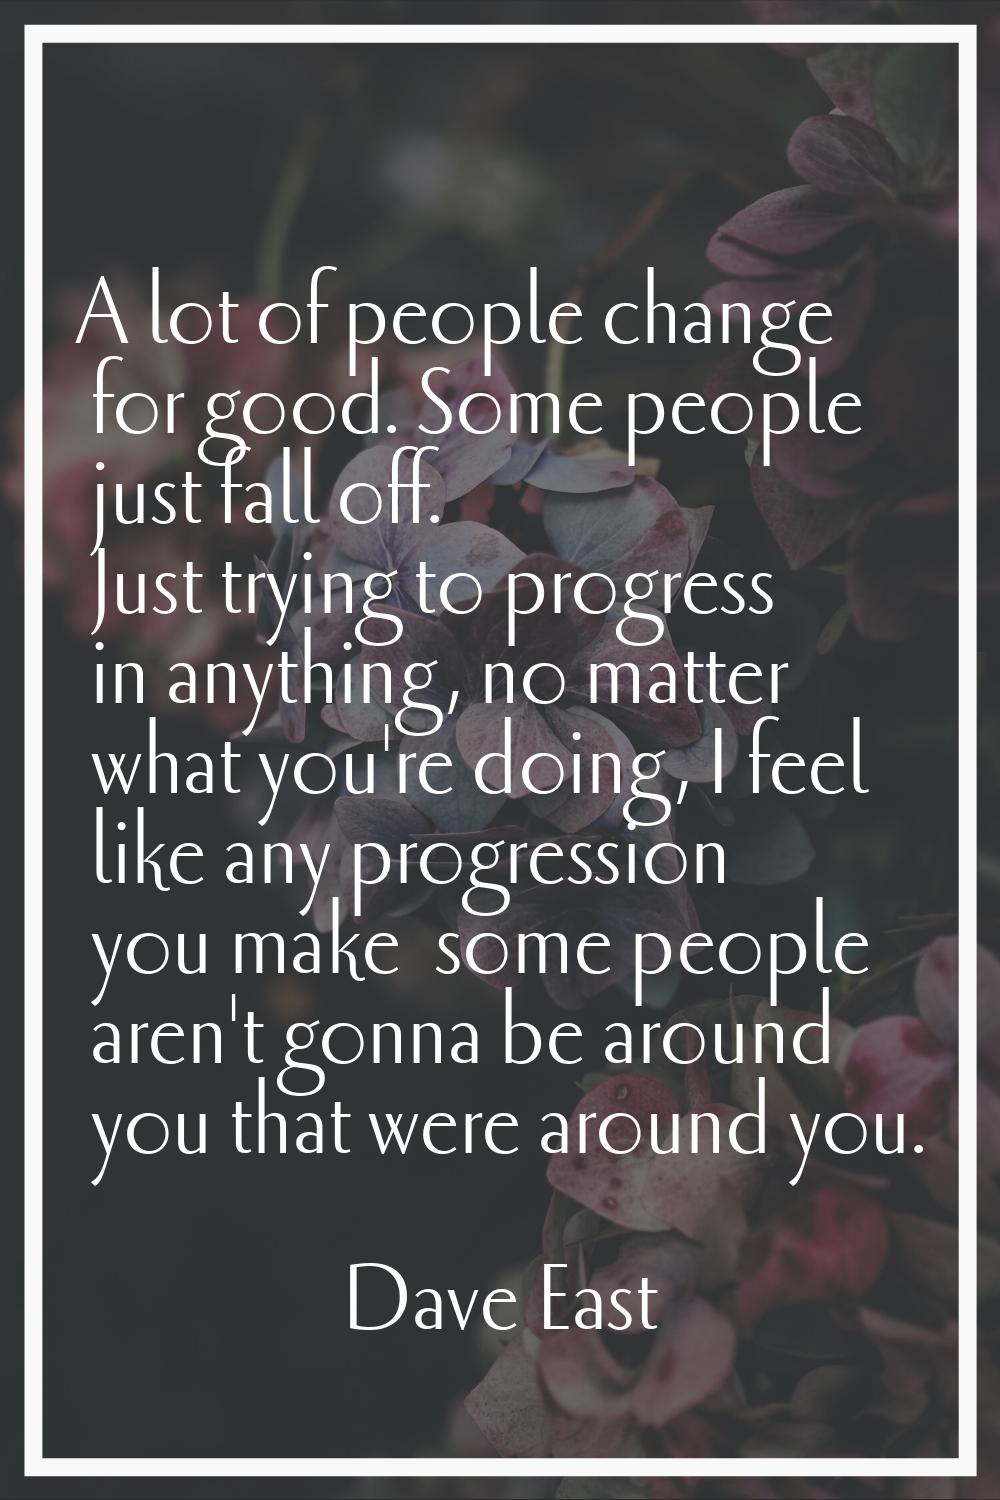 A lot of people change for good. Some people just fall off. Just trying to progress in anything, no